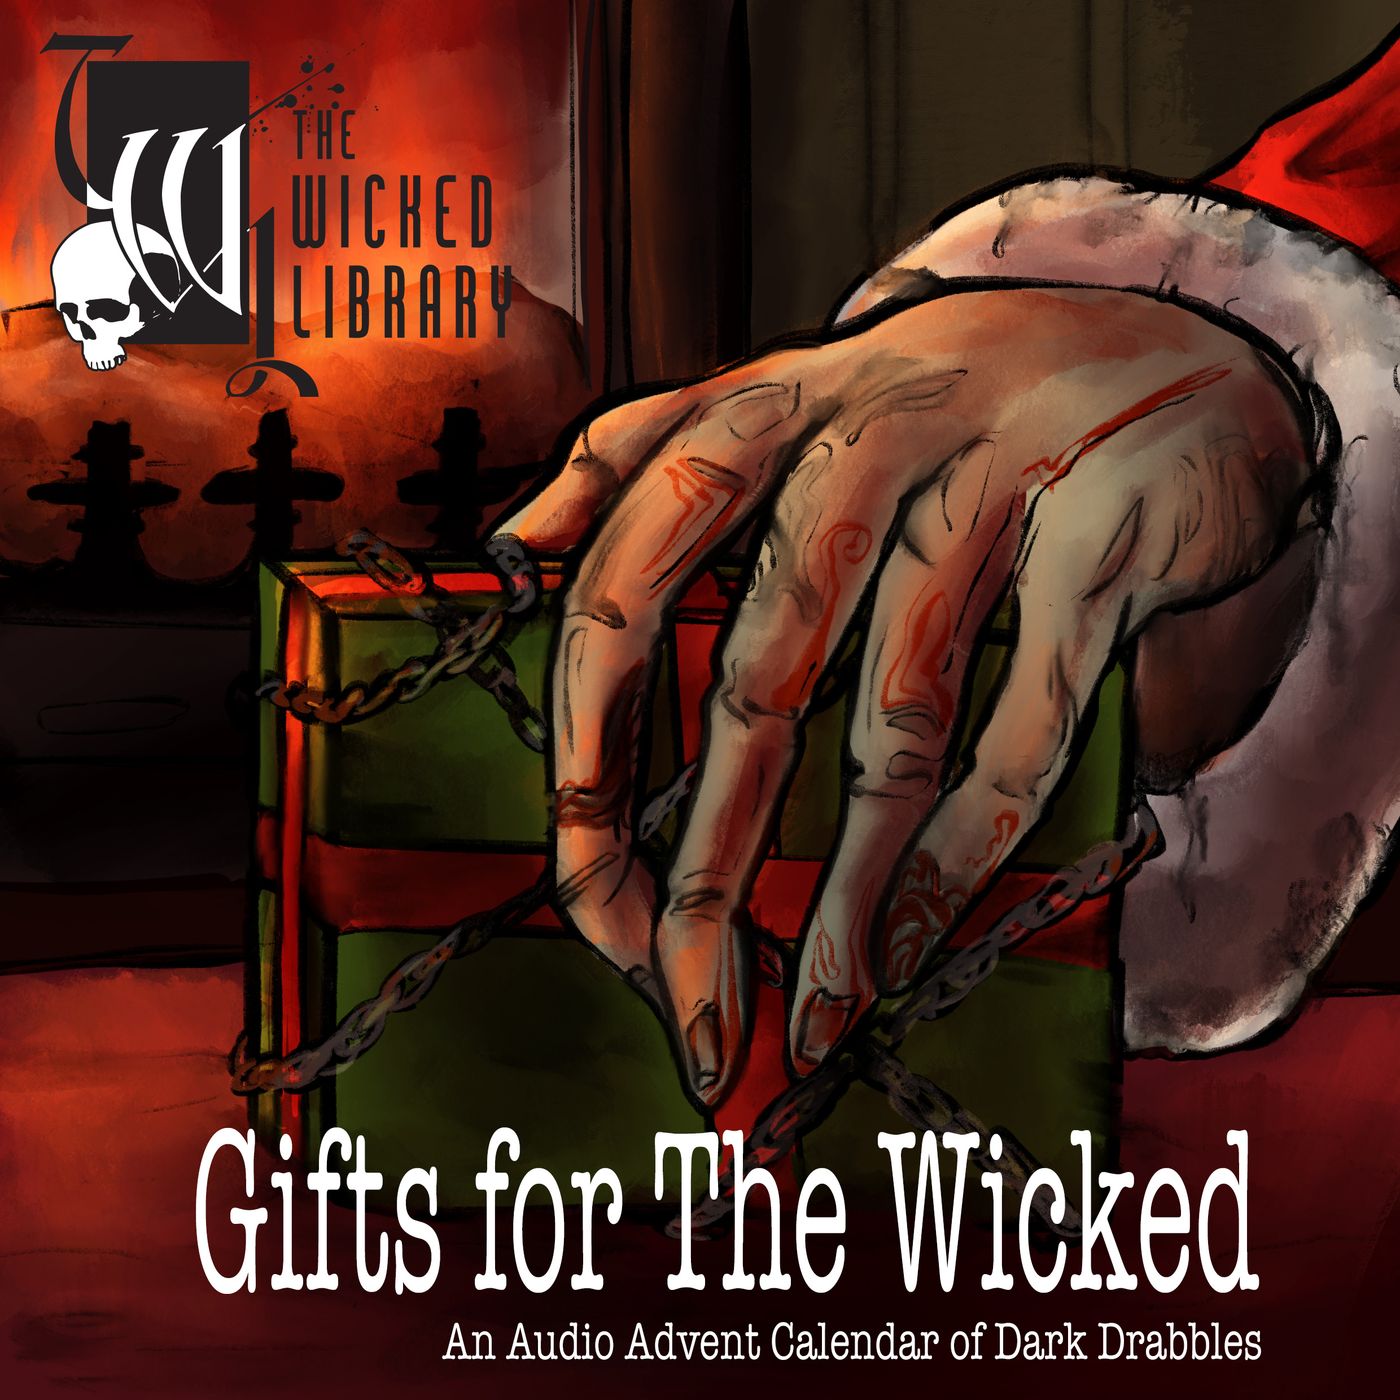 Gifts for The Wicked: ”The Christmas Leftovers”, by Daniel Foytik